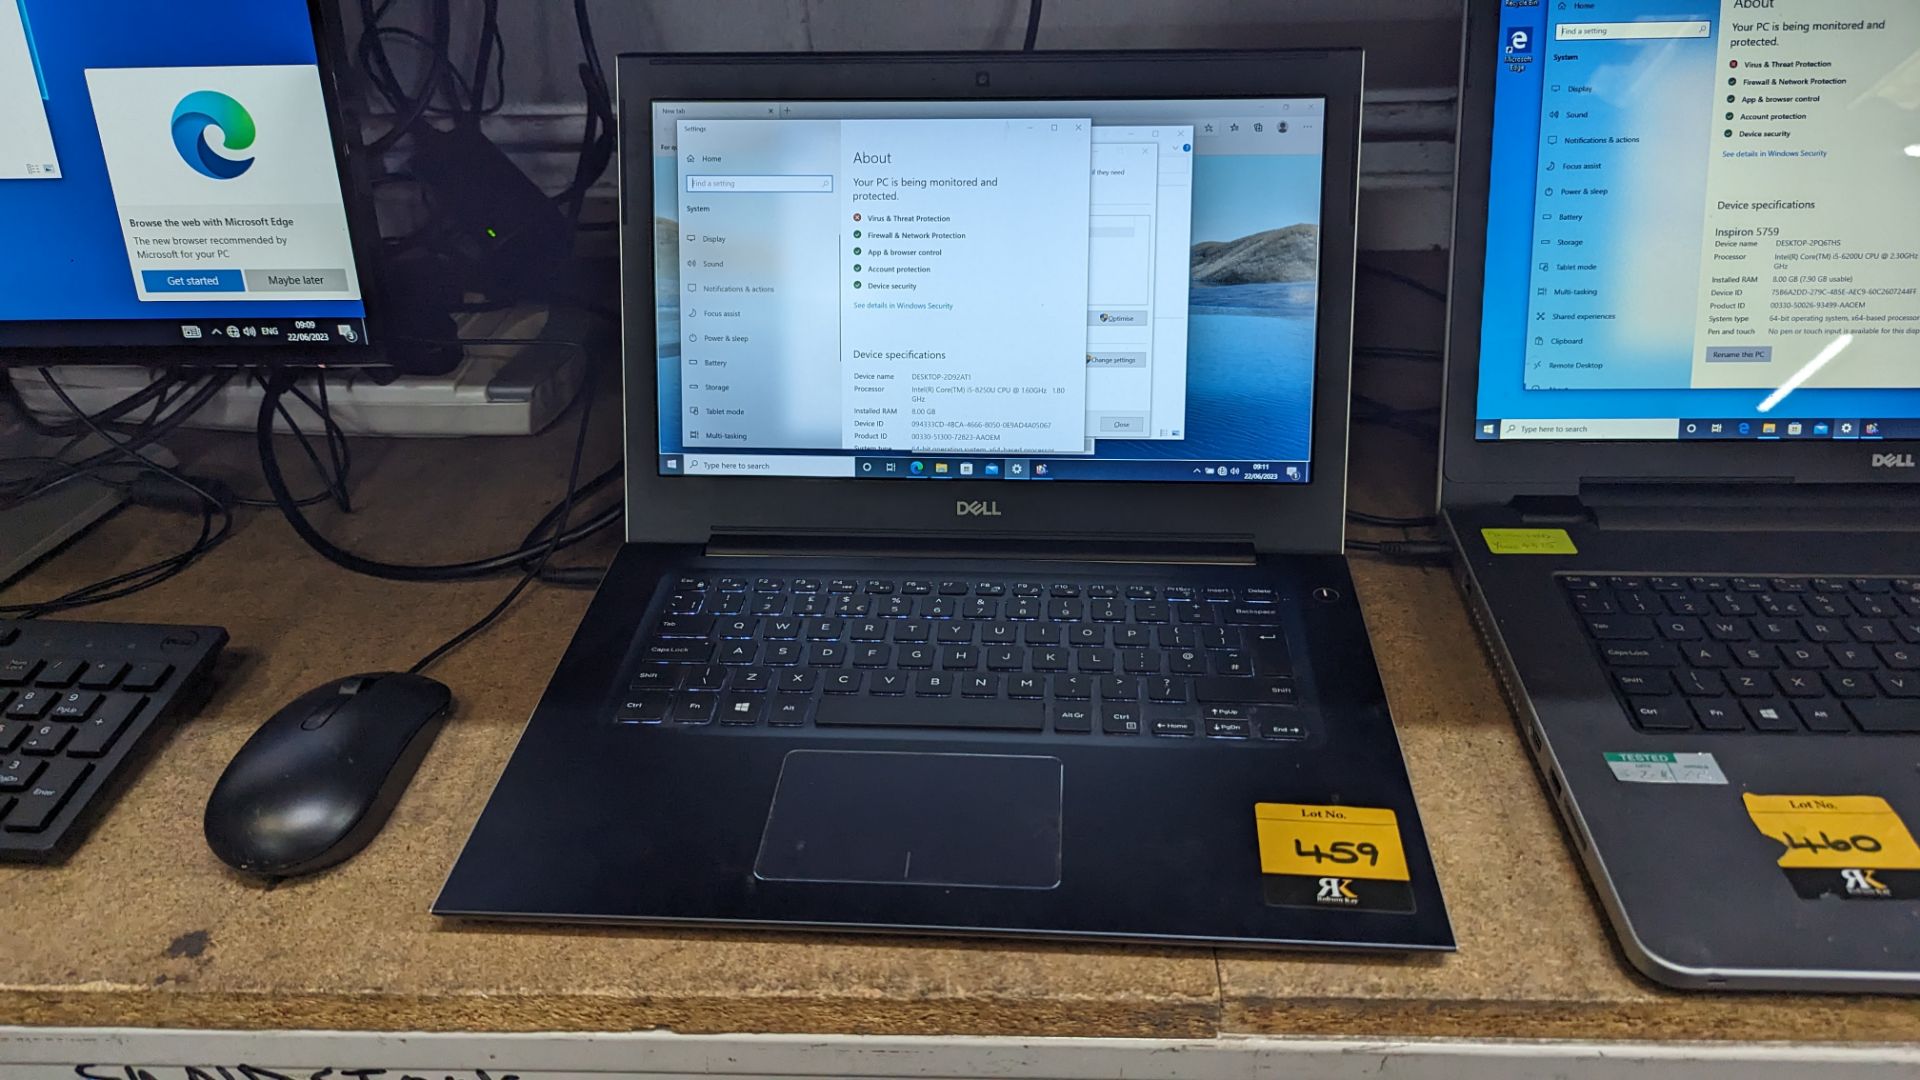 Dell Vostro notebook computer with Intel Core i5-8250 CPU, 8GB RAM, 256GB SSD including power pack/c - Image 2 of 17